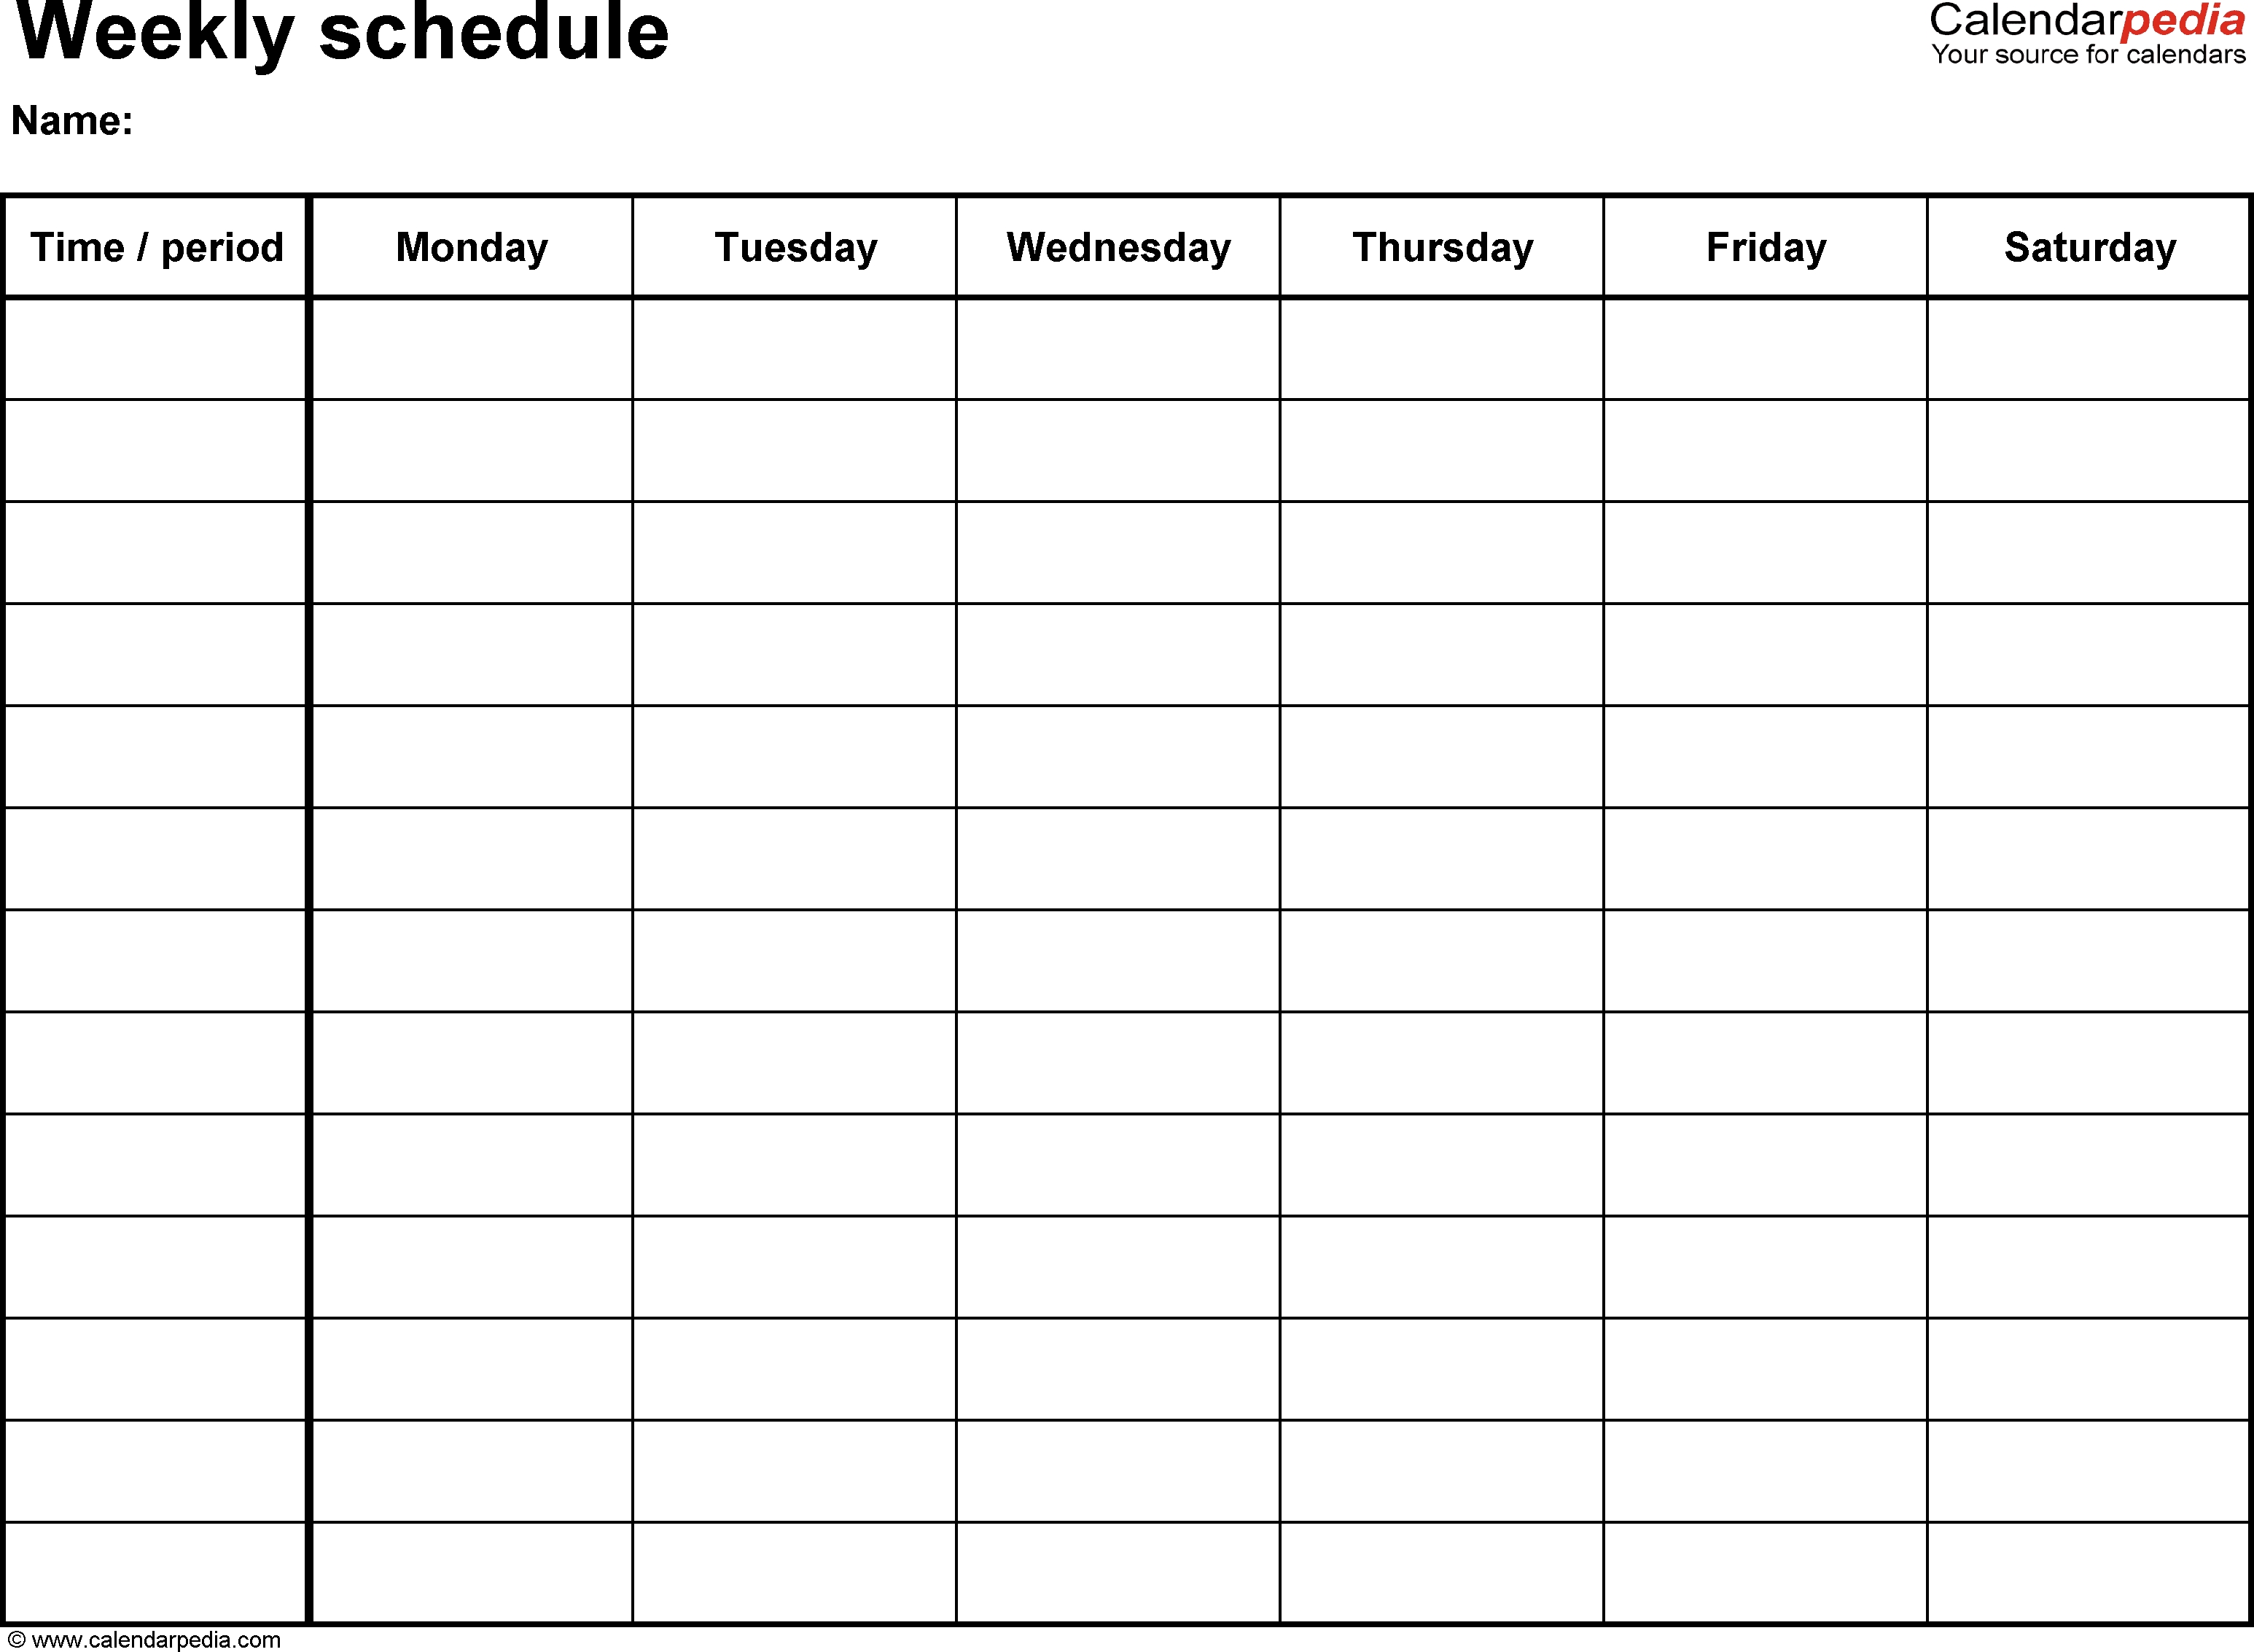 Free Weekly Schedule Templates For Excel - 18 Templates  6 Week Blank Schedule Template